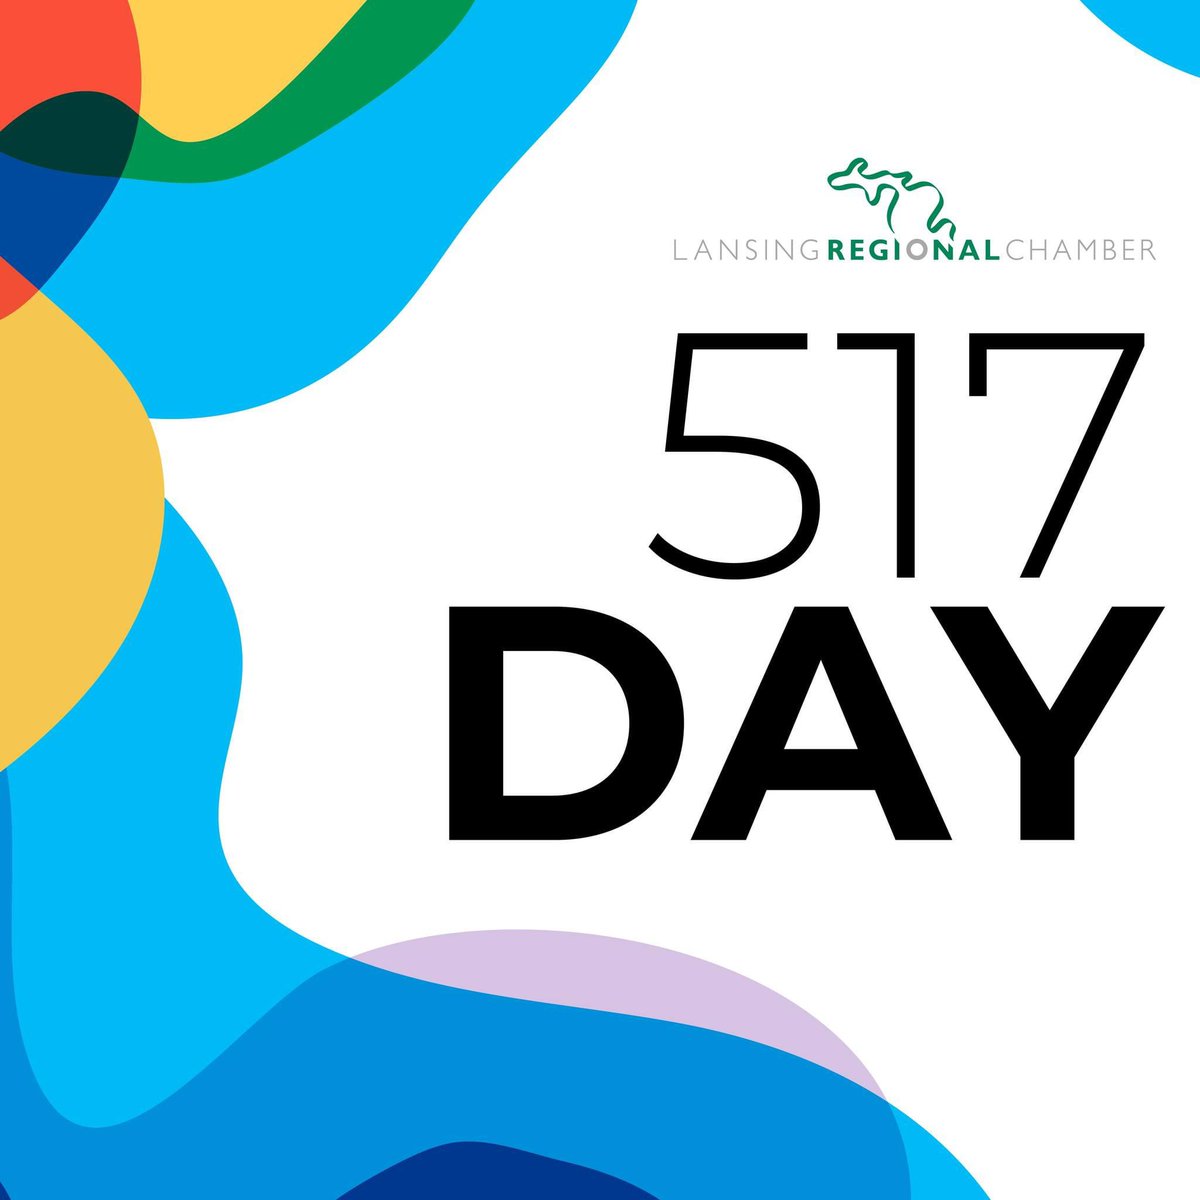 Happy #517Day! ❤️ We are so grateful to be a part of the Greater Lansing community. Celebrate our amazing community by shopping and dining locally today! We want to know what your favorite Lansing businesses are. 👇